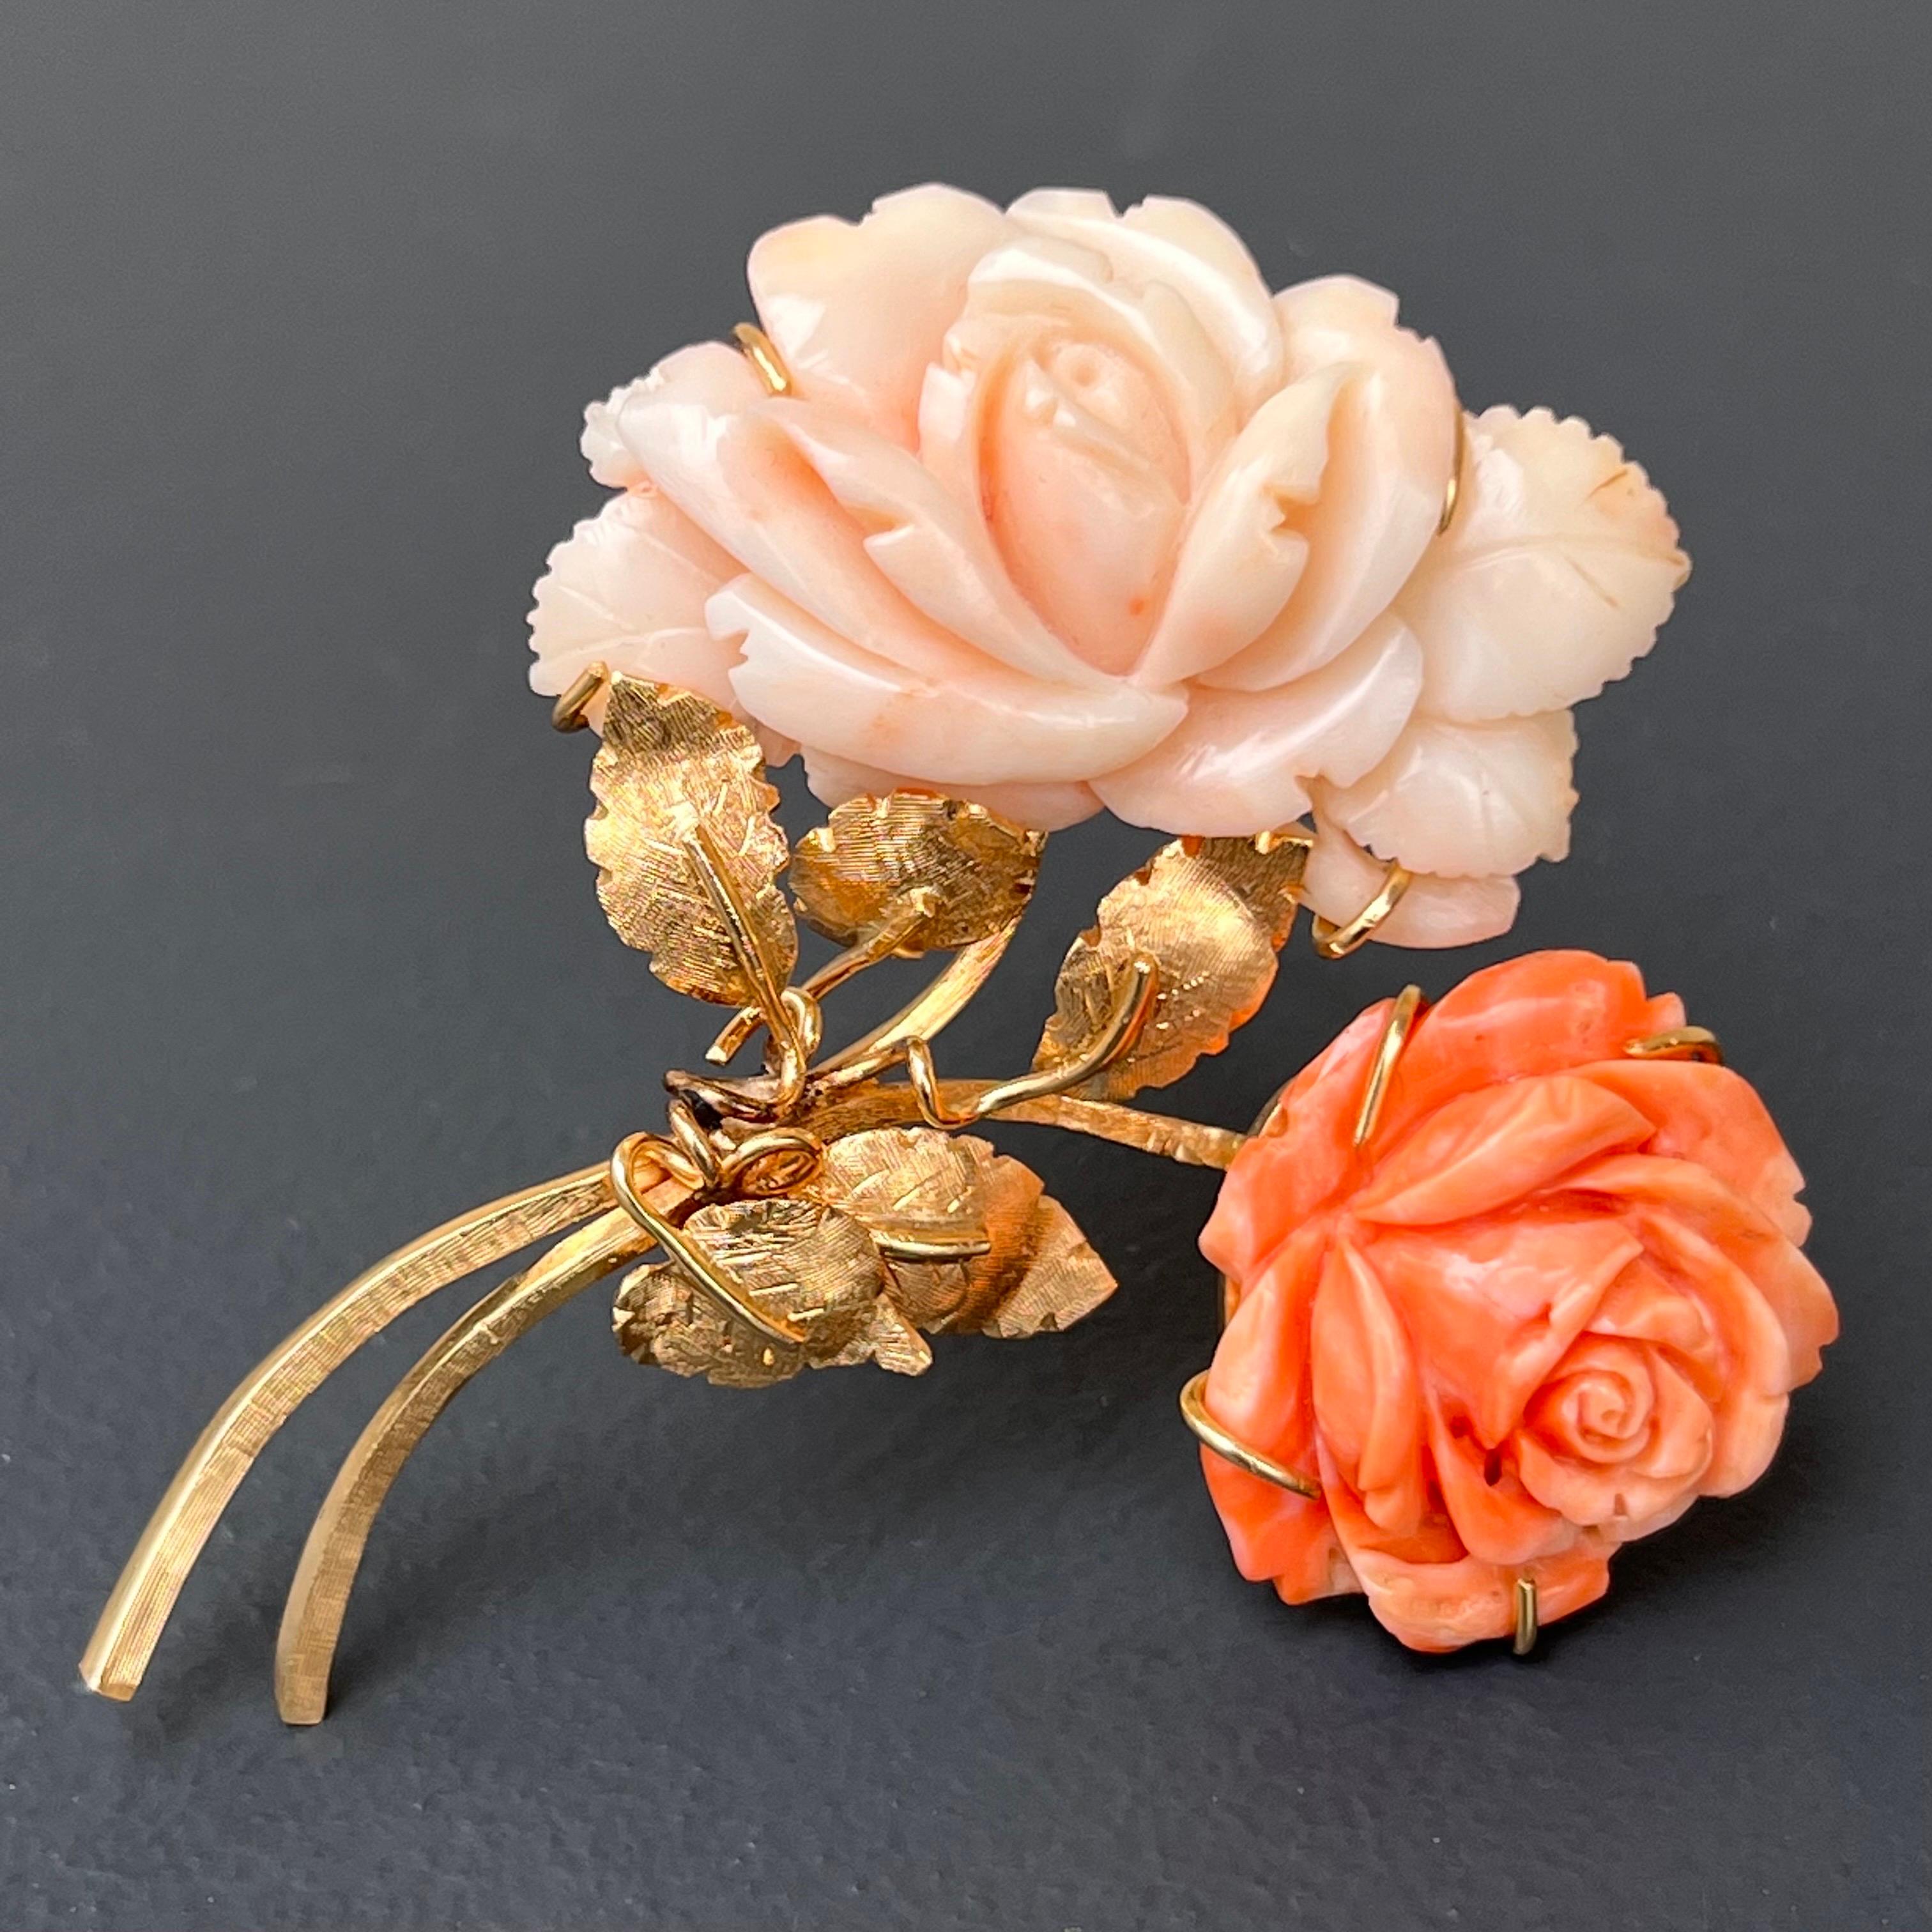 Large finely carved coral floral pin brooch with two colored deeply carved rose flower set in 14kt solid textured gold . back has rollover clasp .
Faded 14kt mark on backside .

Materials:
14kt solid gold
salmon and angel skin carved